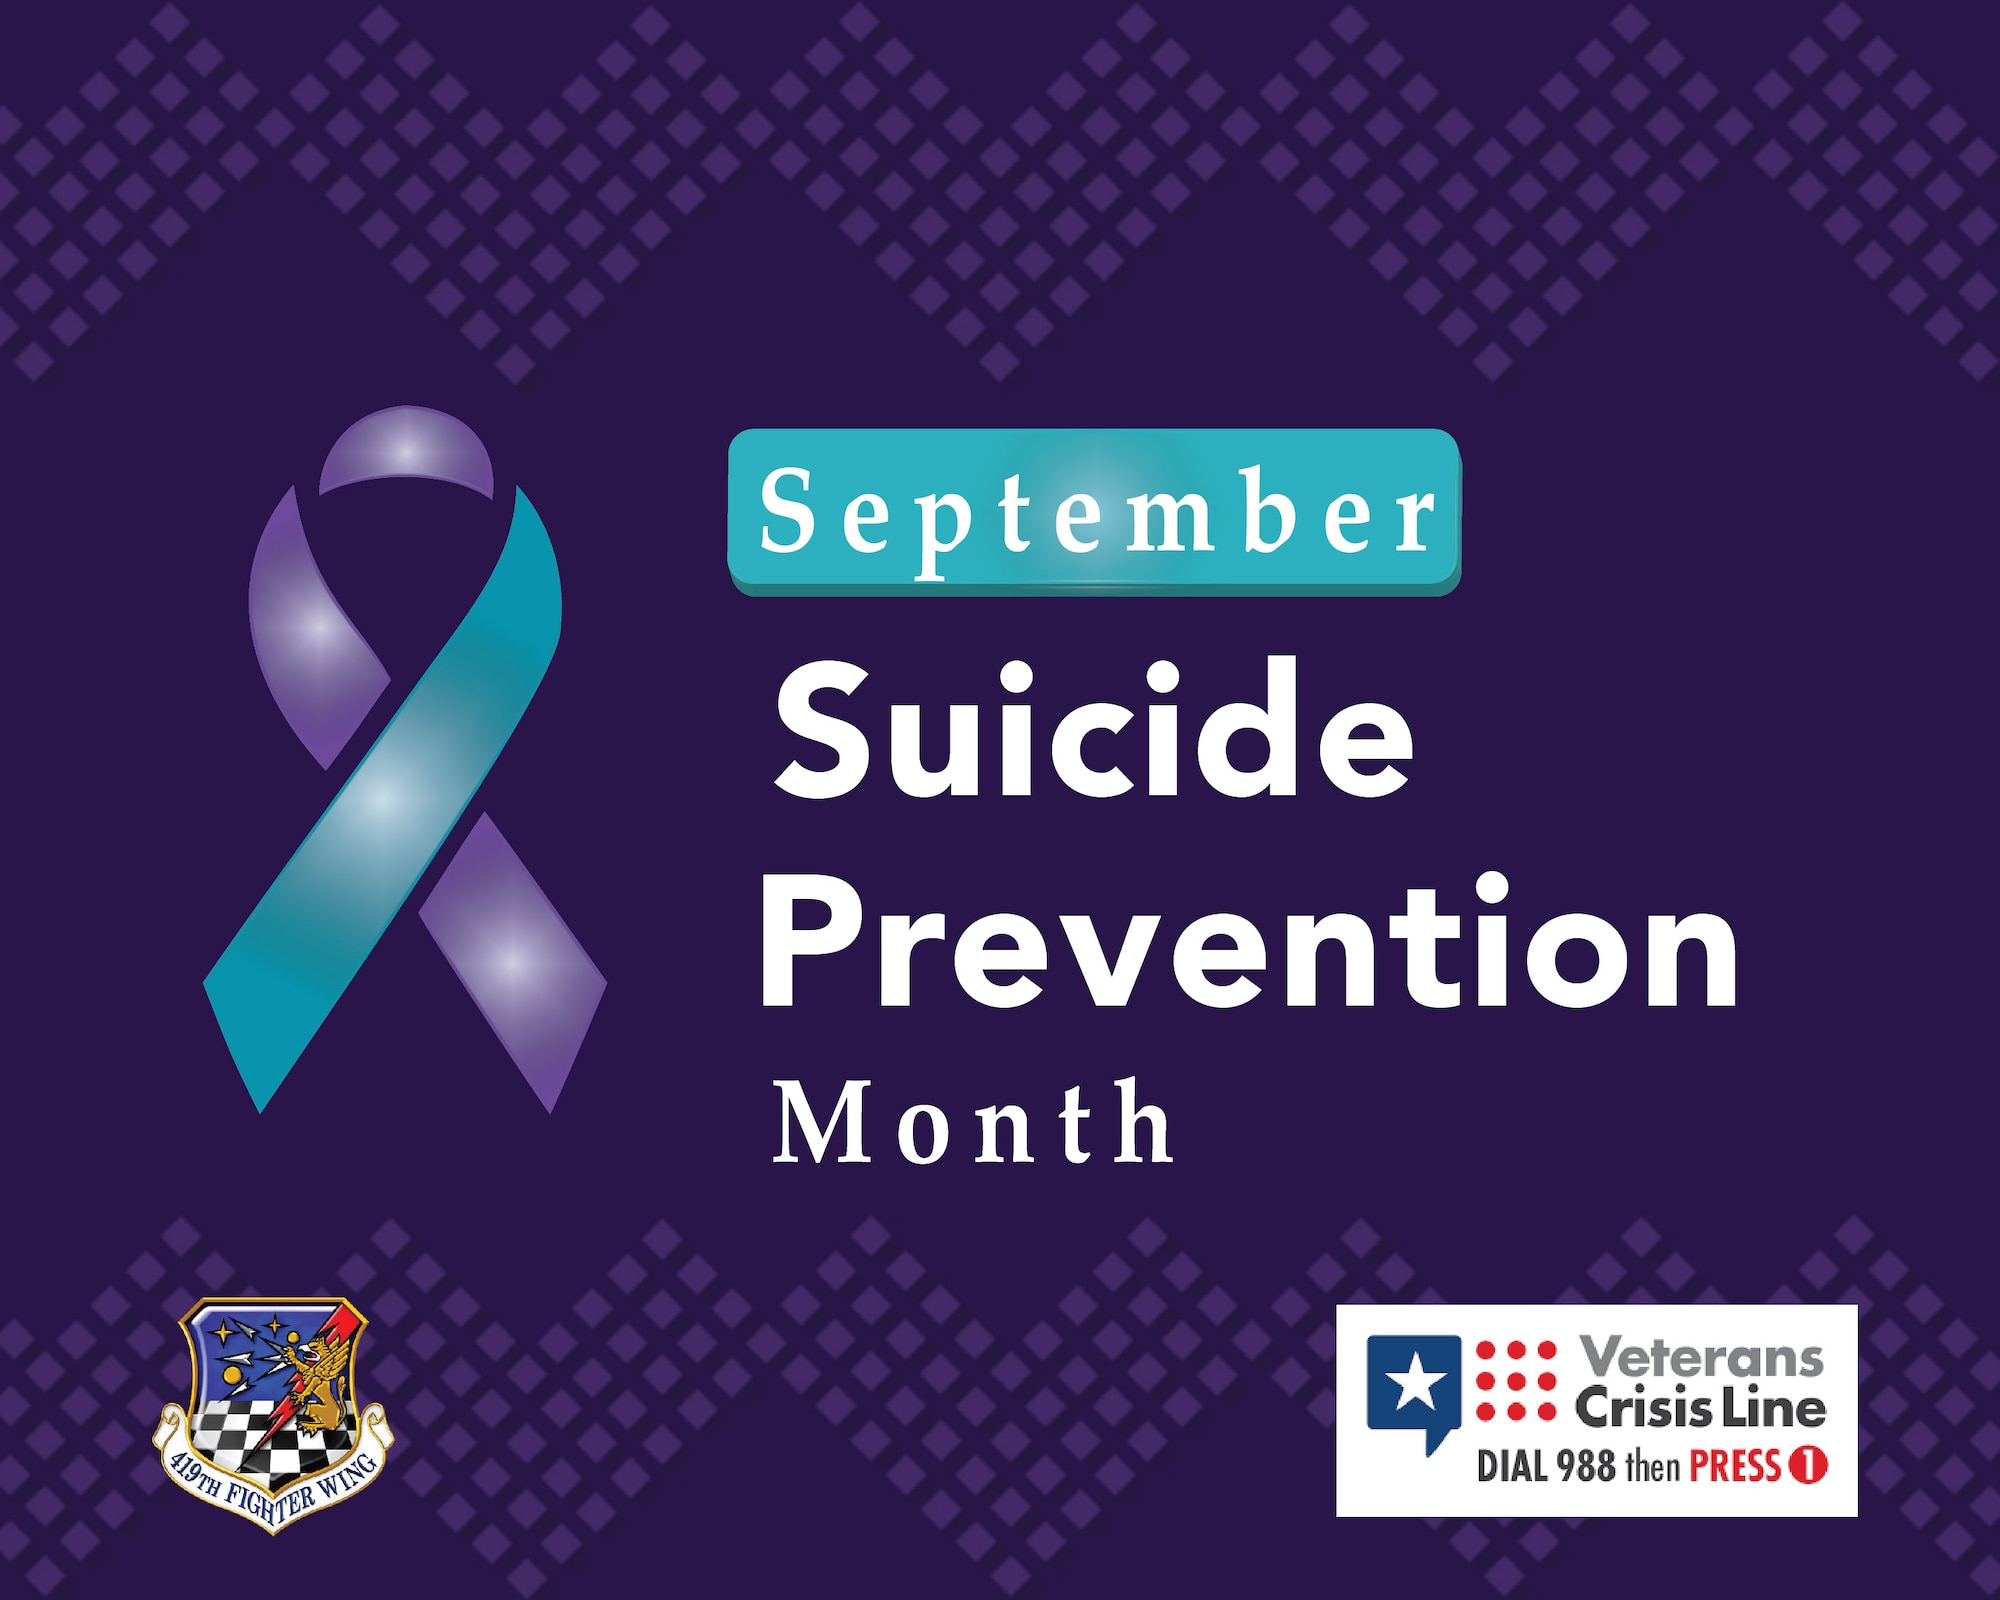 A purple graphic with the suicide prevention ribbon.